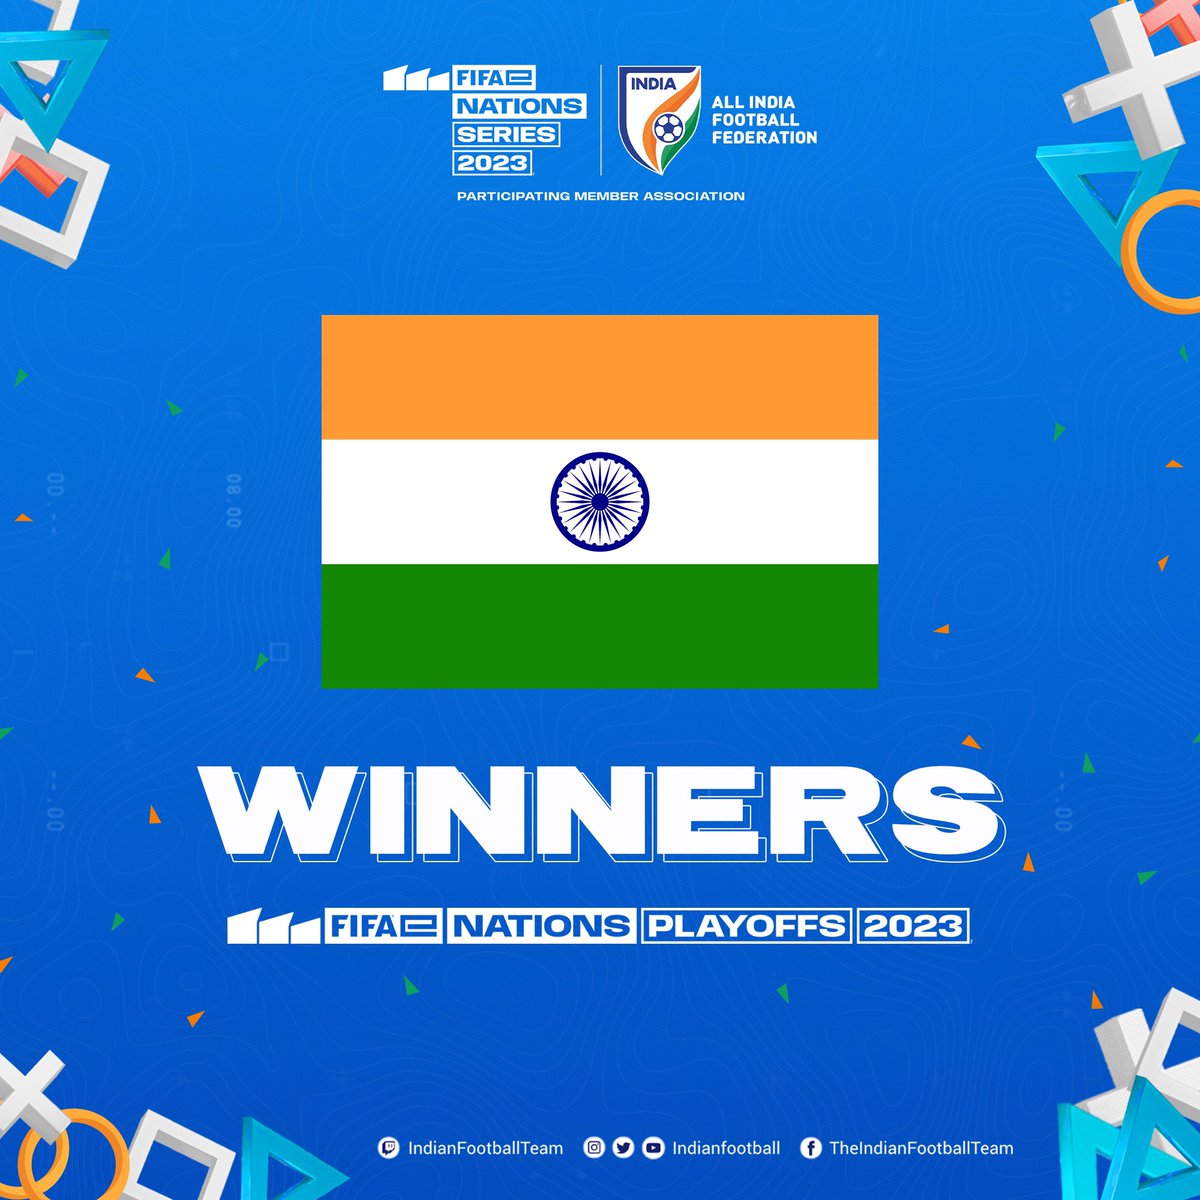 CHAMPIONS 🏆 of Asia and Oceania 🇮🇳🇮🇳

Show us your 💙💙 in the comments👇

#FeNS23 🎮 #FeNC 🏆 #eTigers 🐯 #BackTheBlue 💙 #IndianFootball ⚽